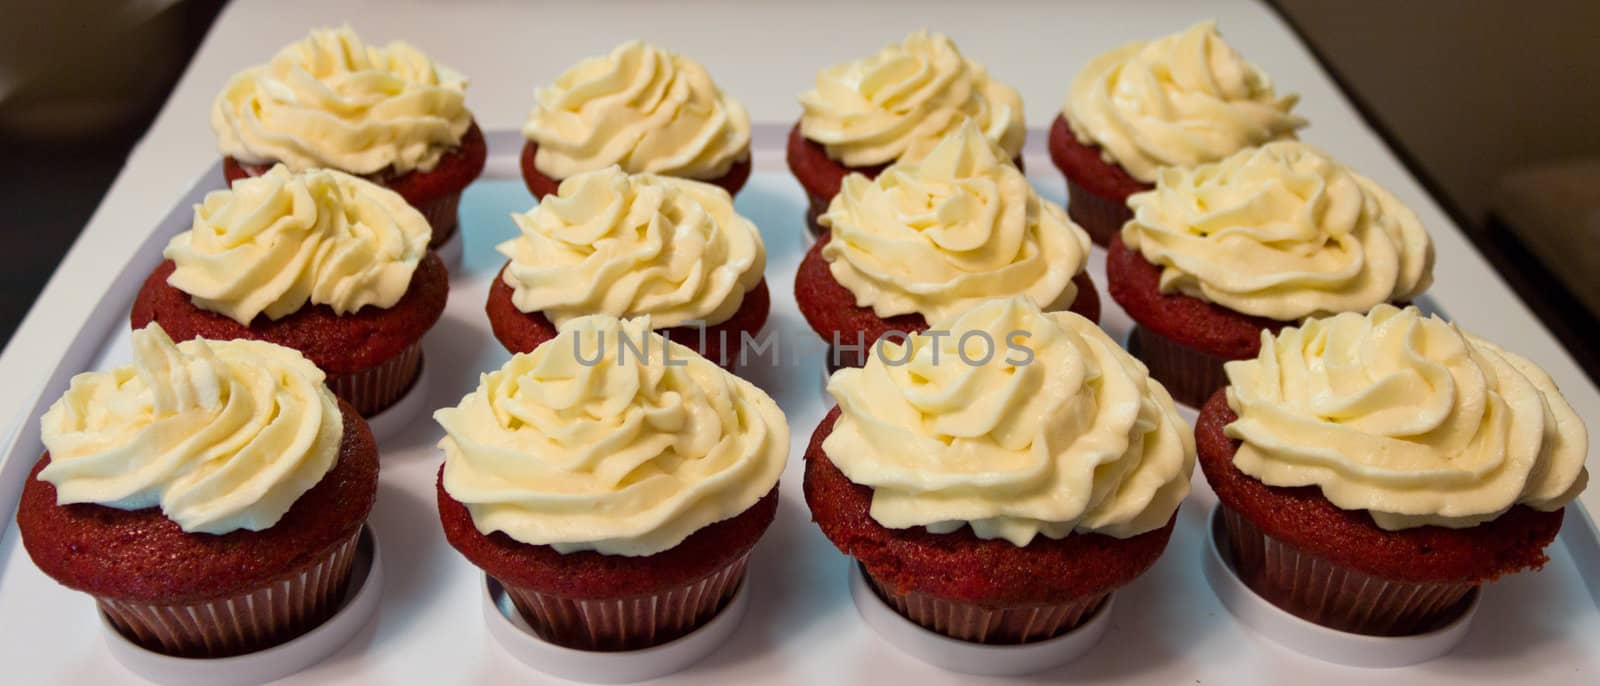 Tray of red velvet cupcakes with buttercream icing.